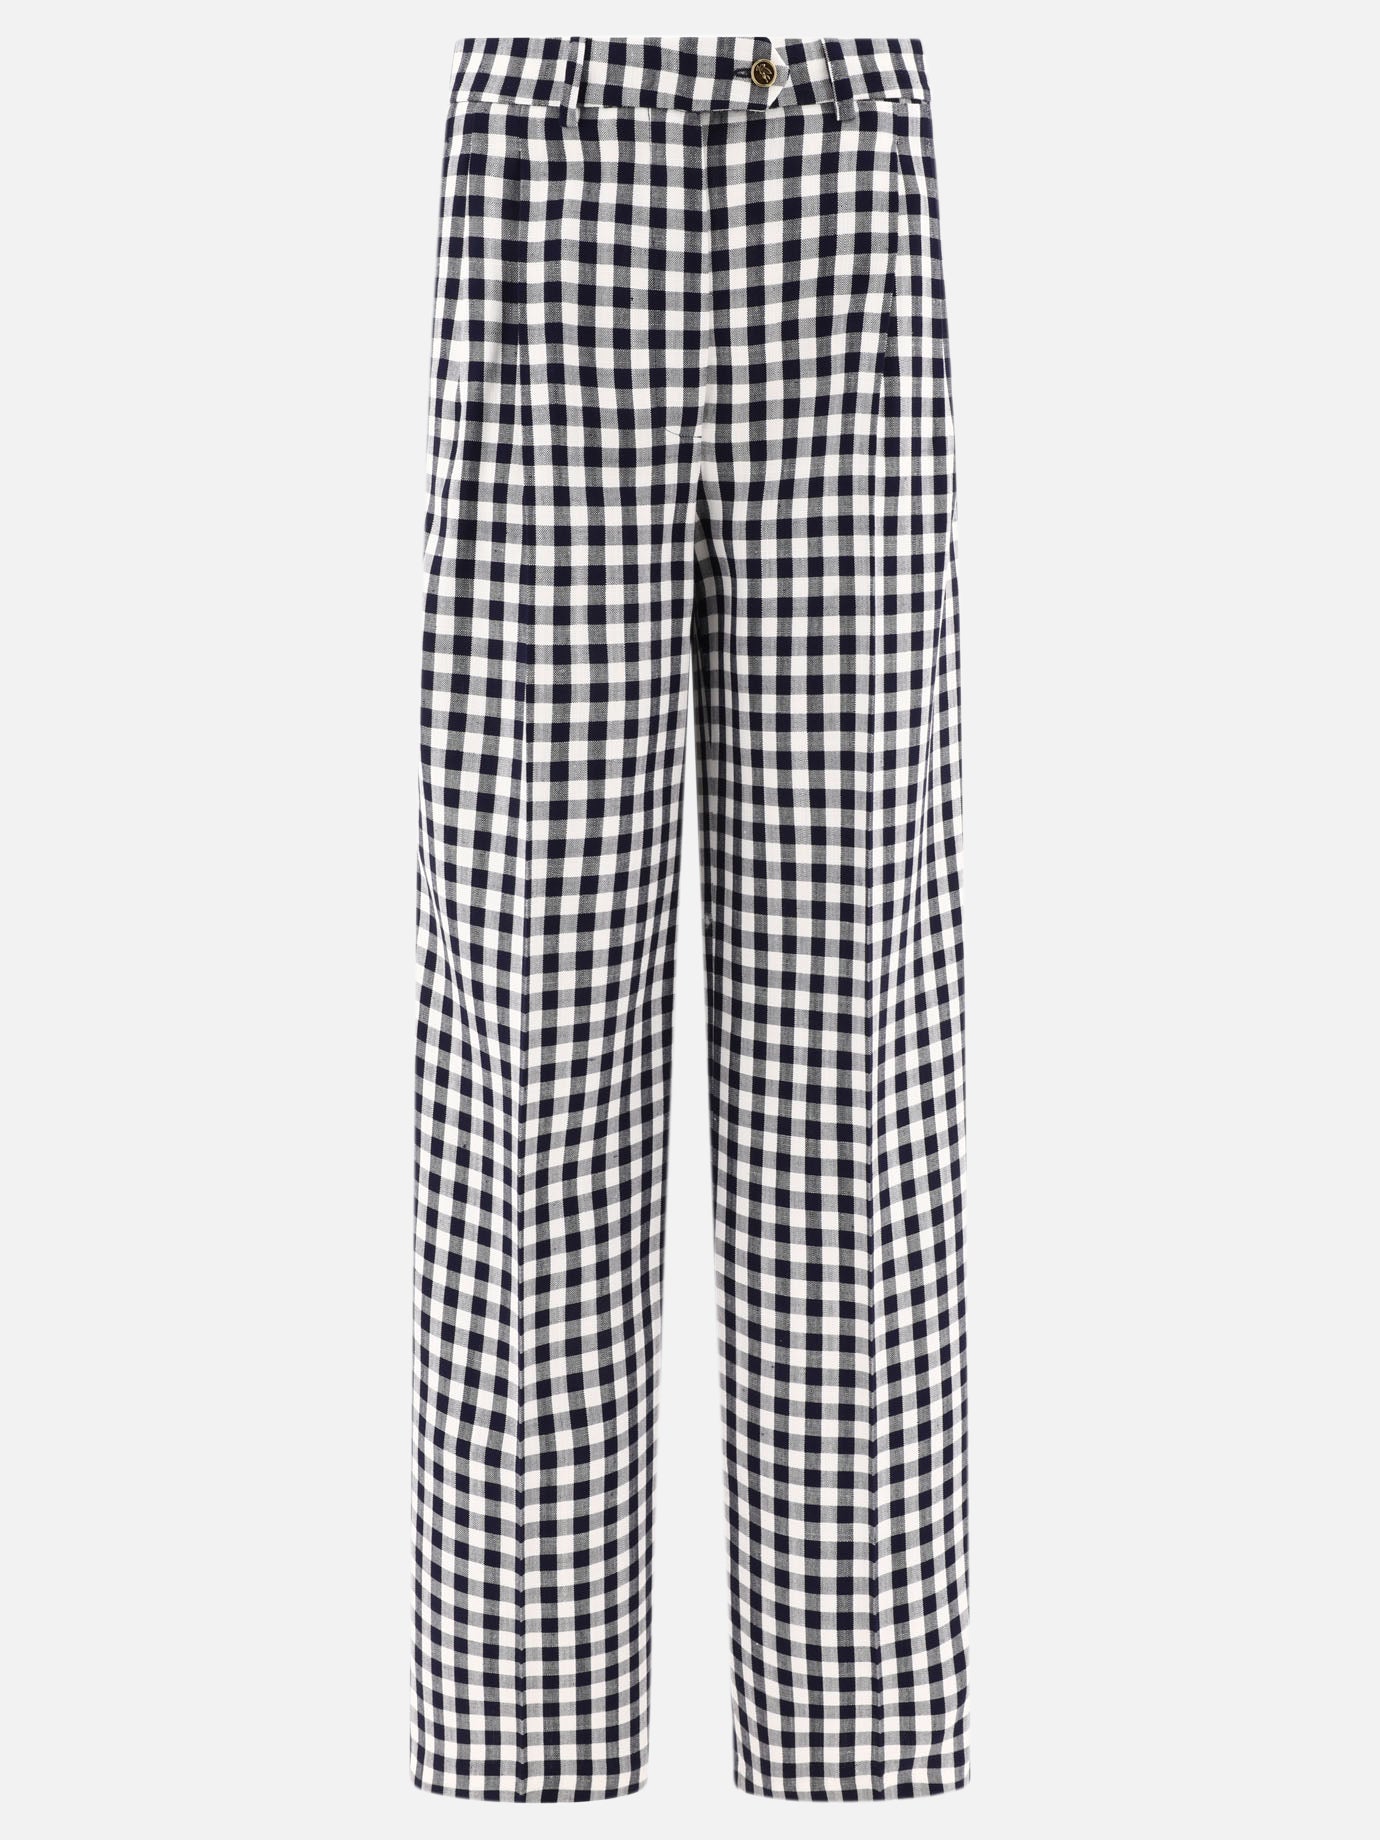 Gingham trousers